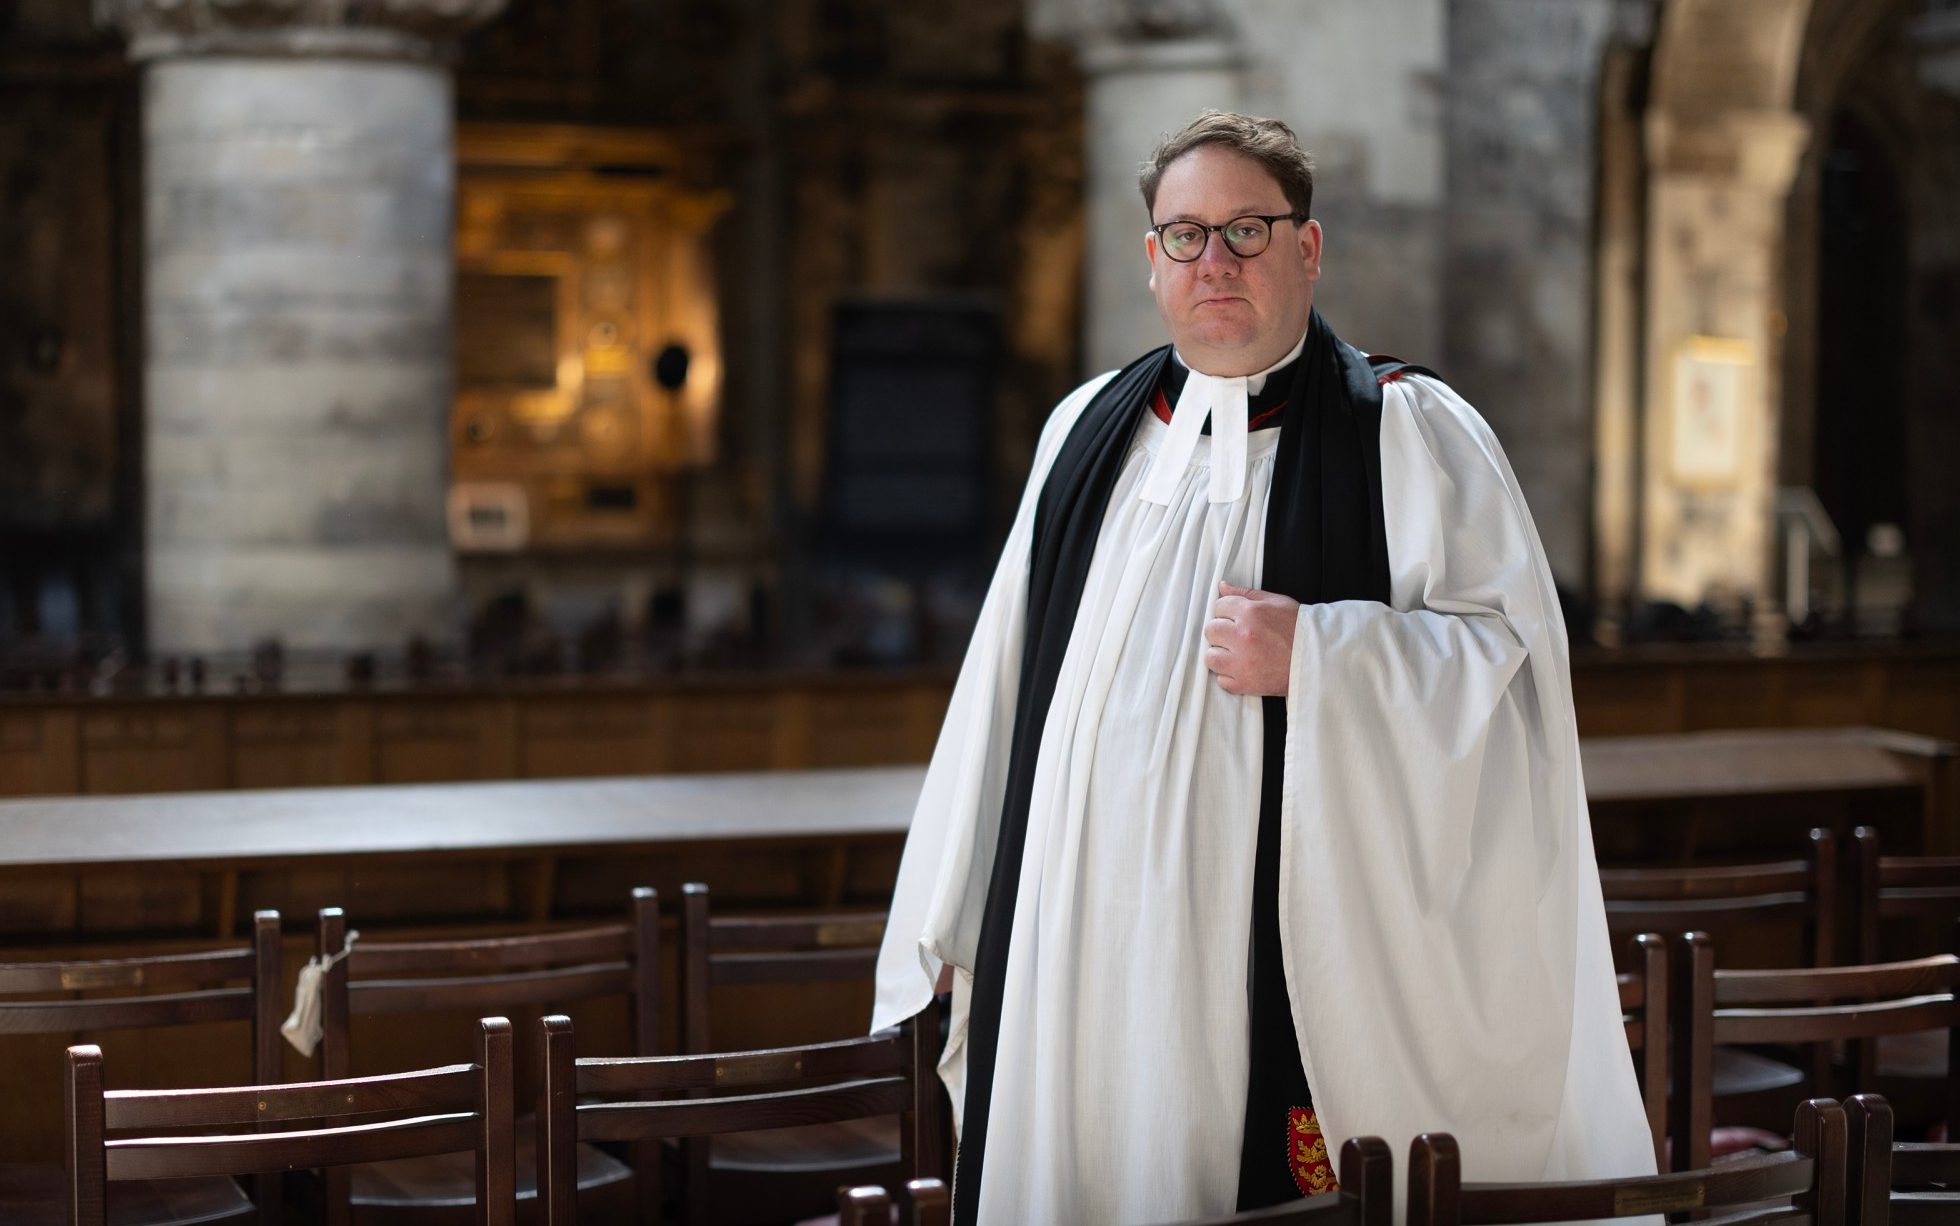 clergy warn of ‘doom spiral’ as church attendance drops off at record rate